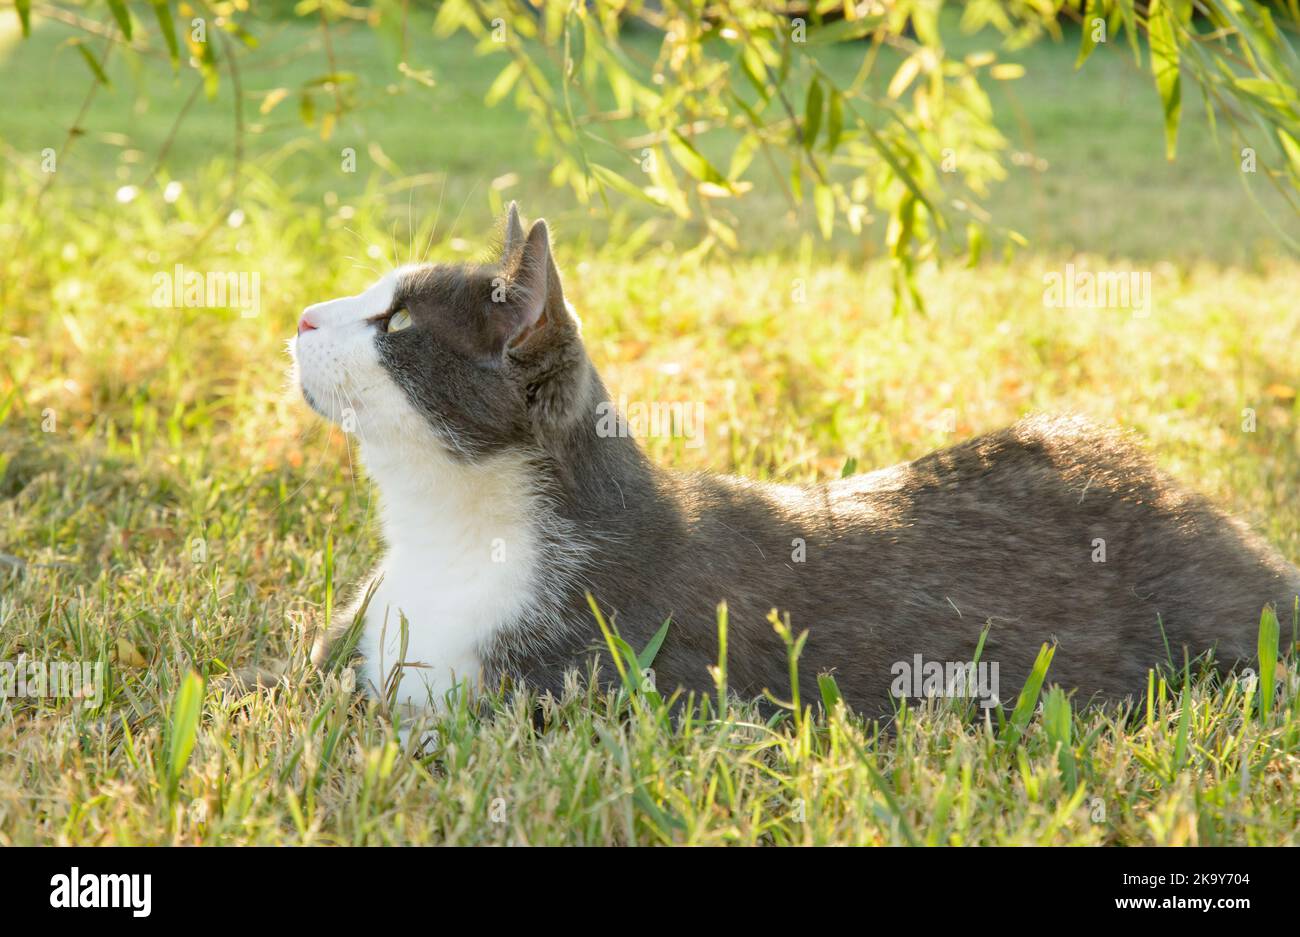 Beautiful gray and white cat in grass in the shade of a willow tree, looking up; back lit by late afternoon sun Stock Photo